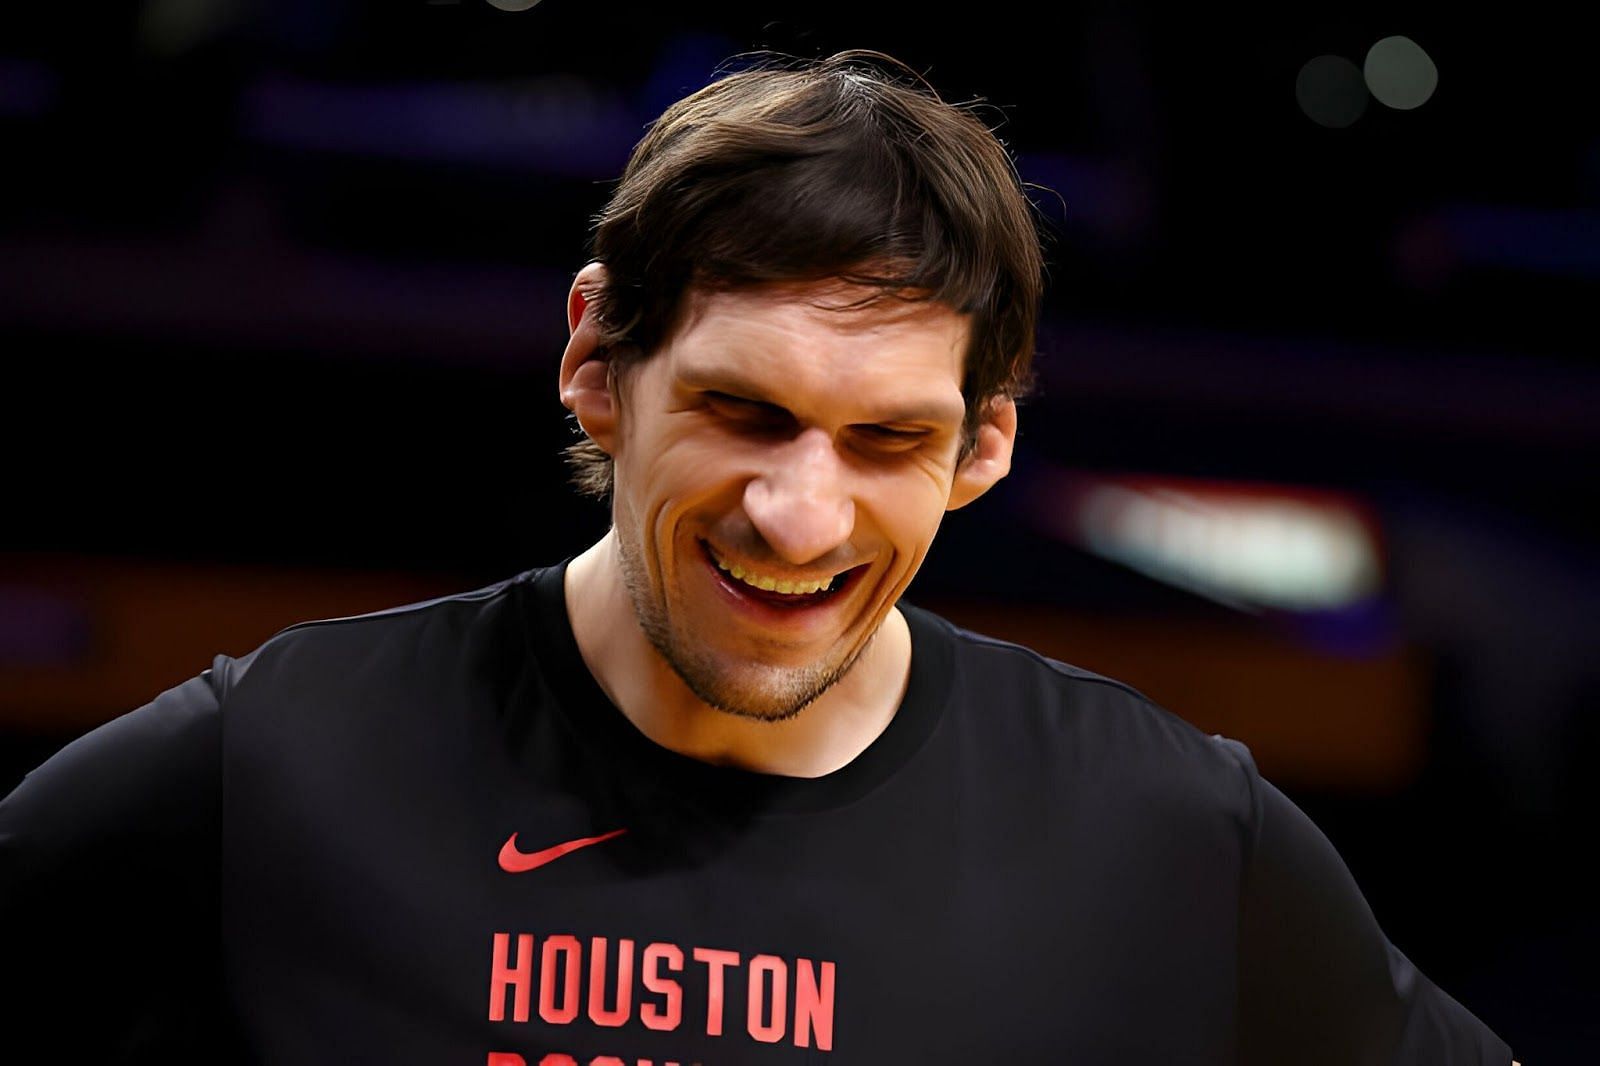 Where is Boban Marjanovic from?